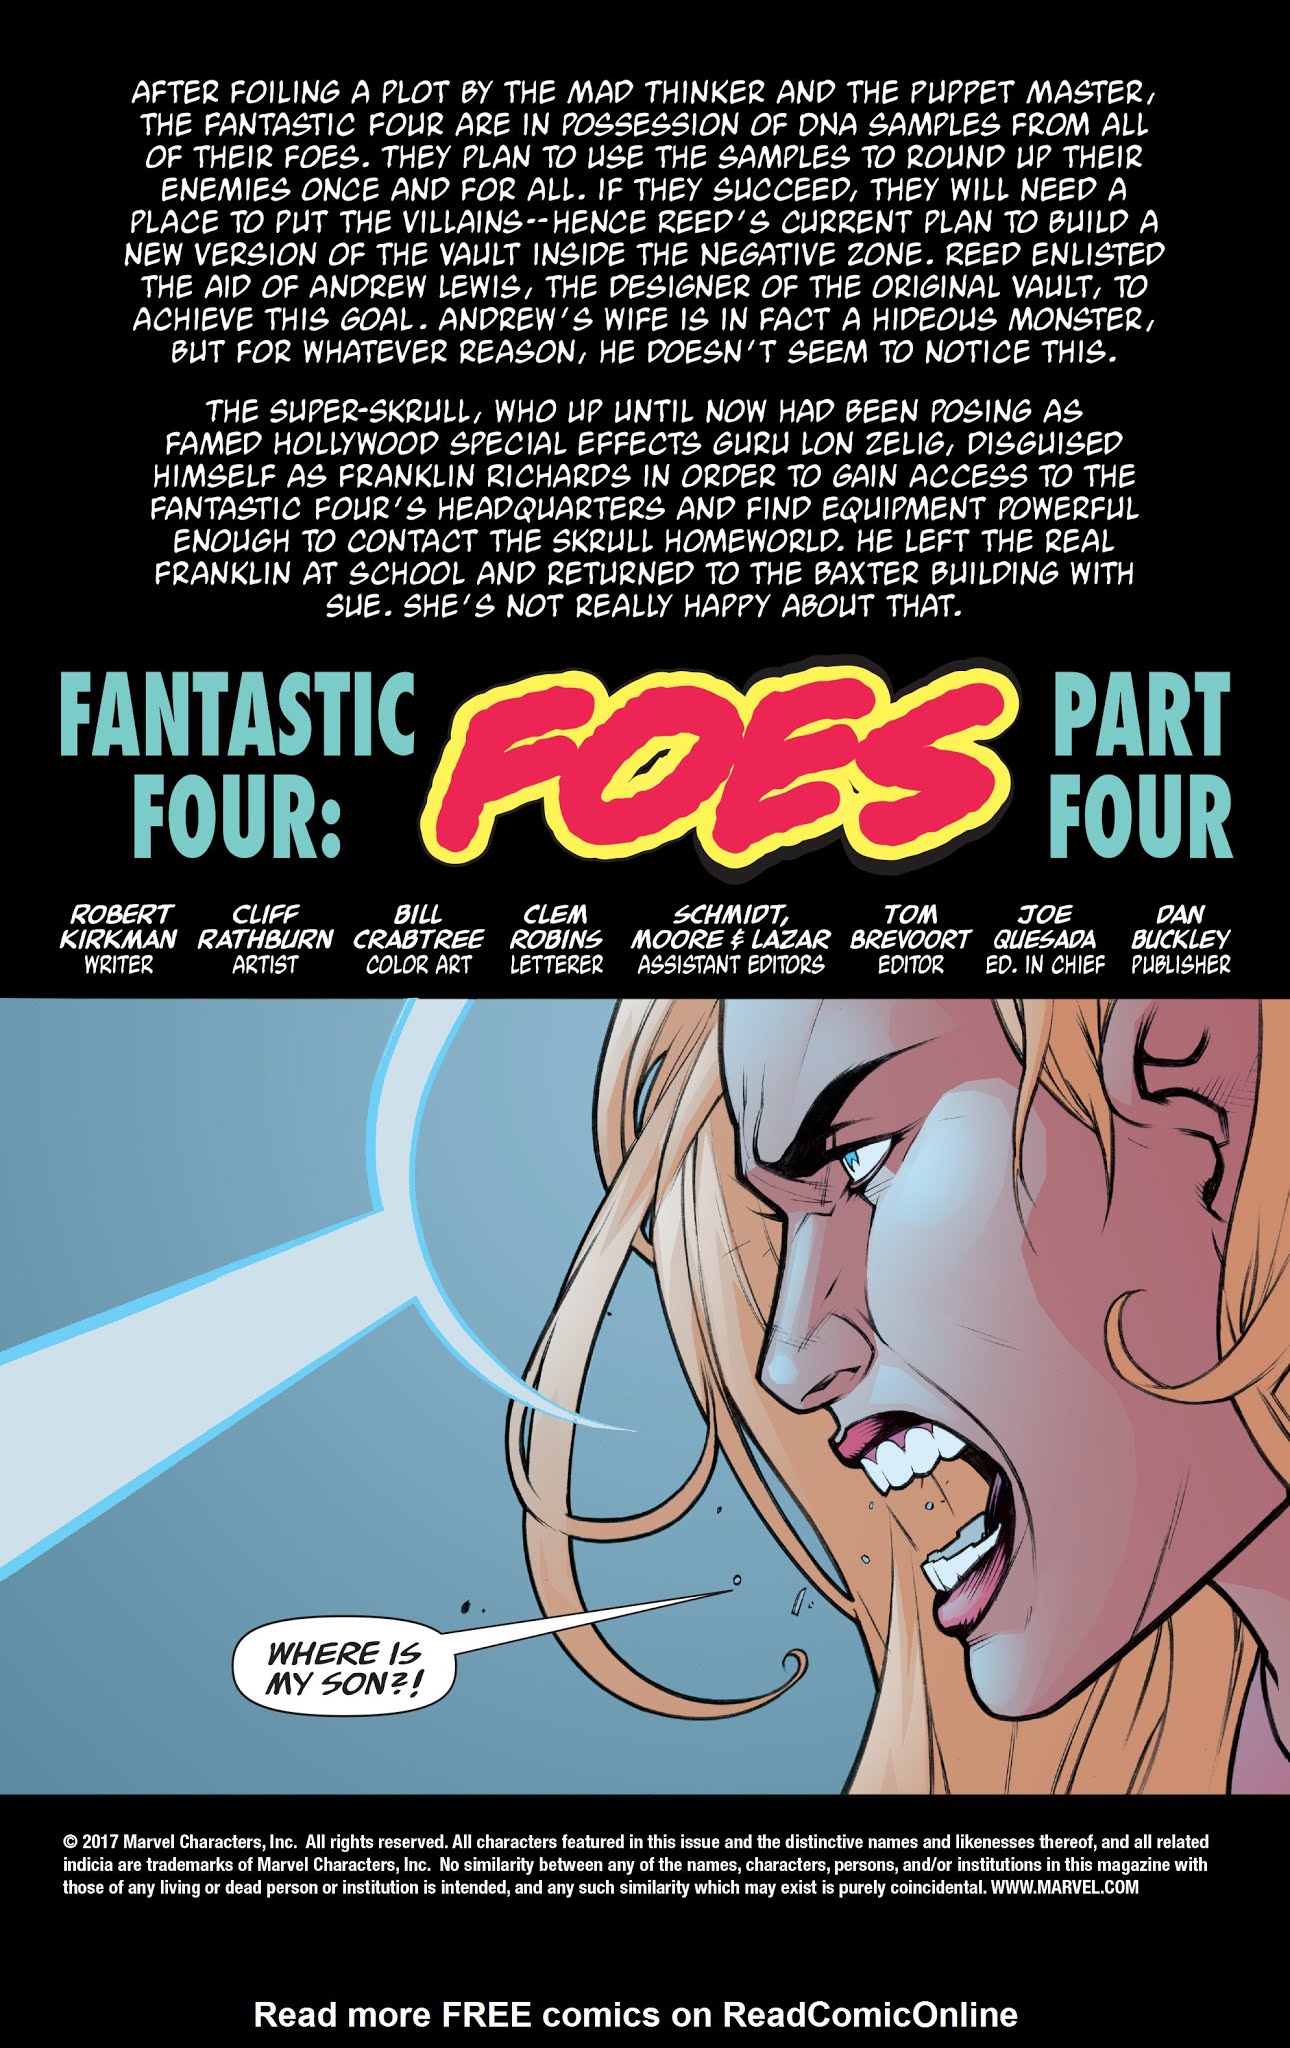 Read online Fantastic Four: Foes comic -  Issue #4 - 2